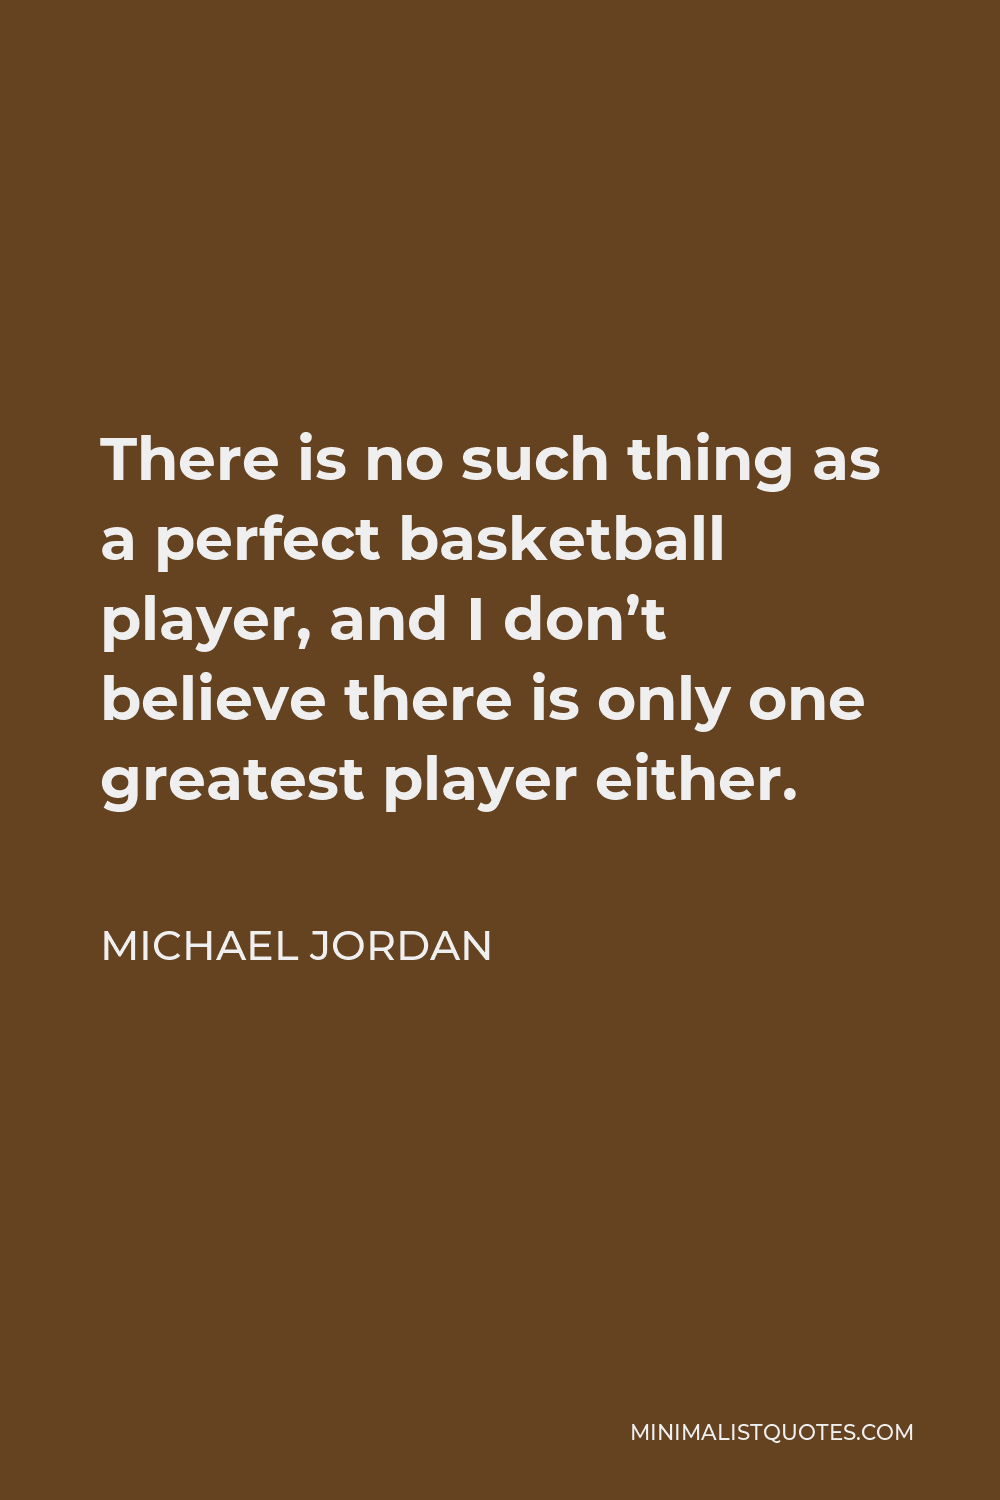 Michael Jordan Quote - There is no such thing as a perfect basketball player, and I don’t believe there is only one greatest player either.